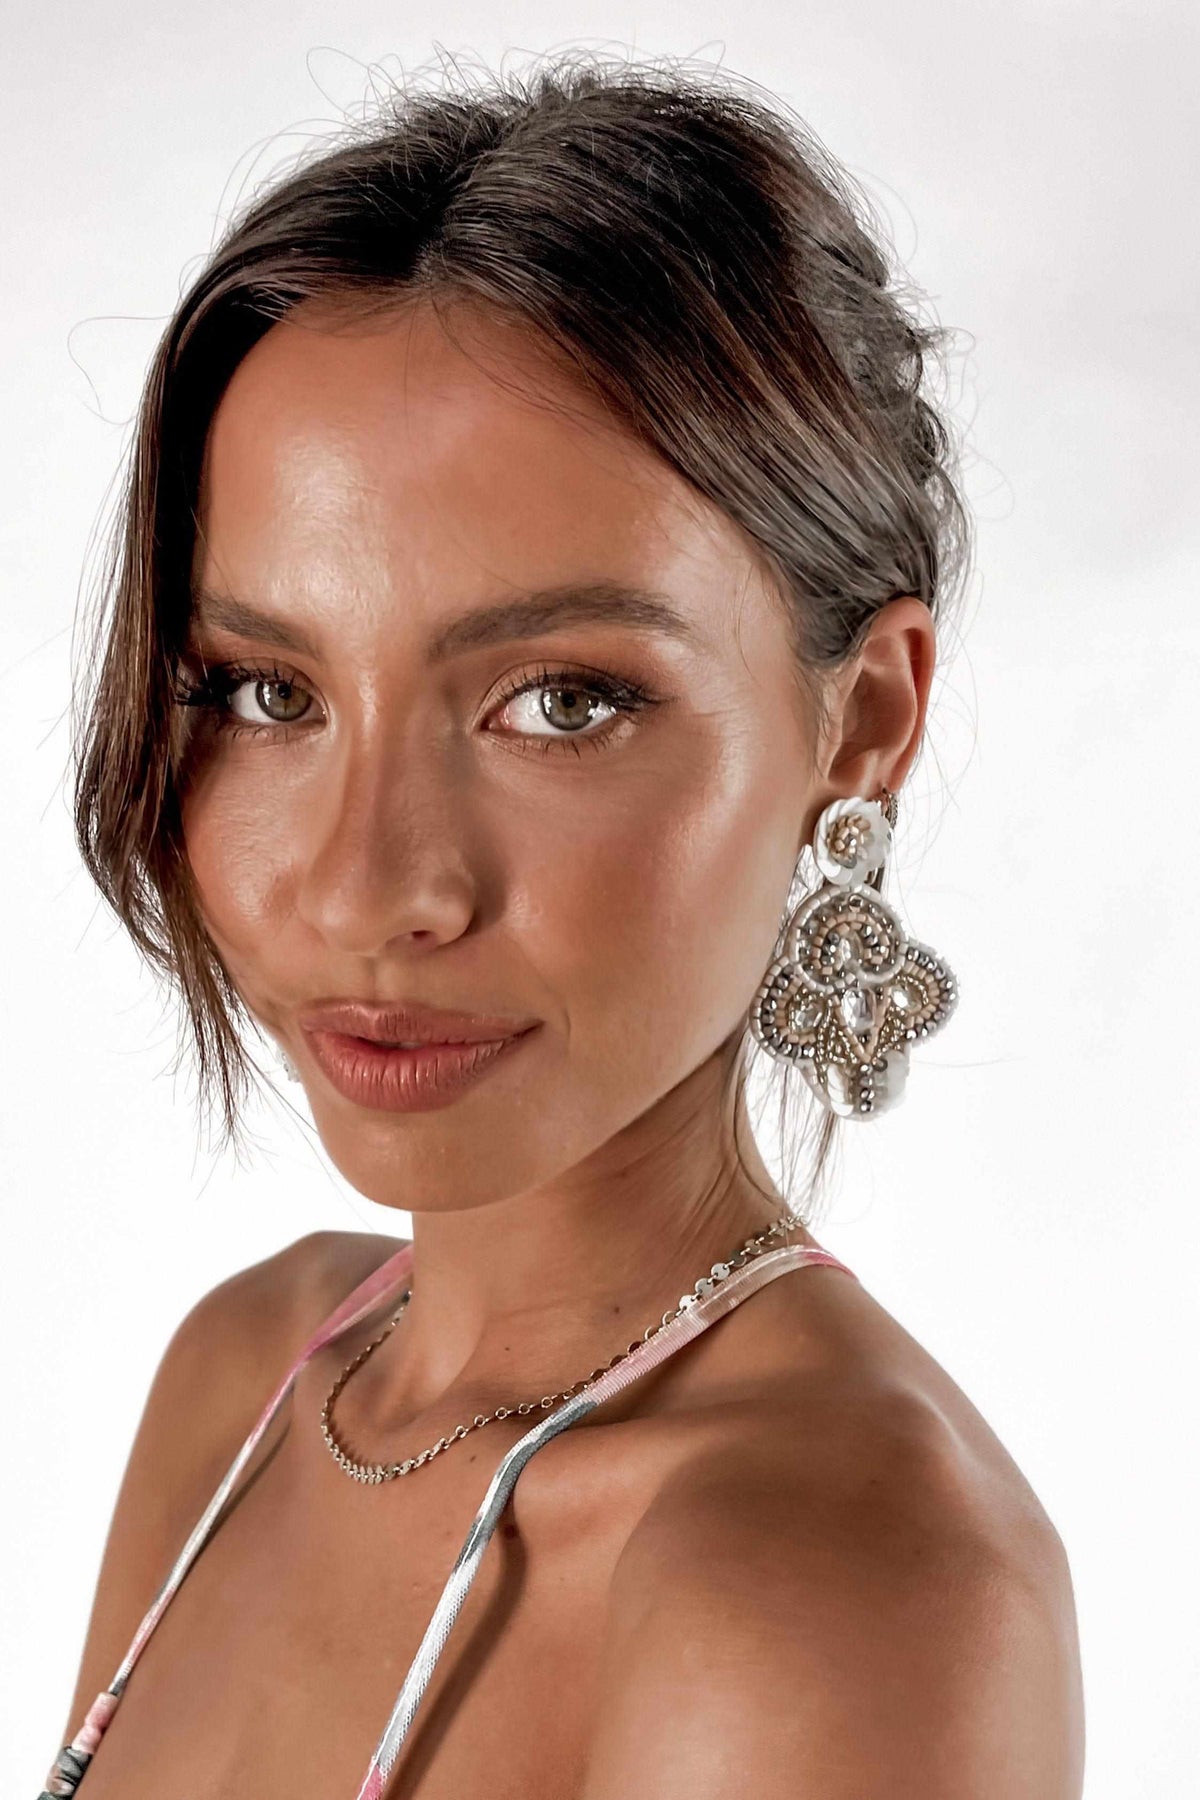 Chantelle Earrings, ACCESSORIES, EARRINGS, JEWELLERY, SILVER, Our New Chantelle Earrings Is Now Only $33.00 Exclusive At Mishkah, We Have The Latest Fashion Accessories @ Mishkah Online Fashion Boutique Our New Chantelle Earrings is now only $33.00-MISHKAH